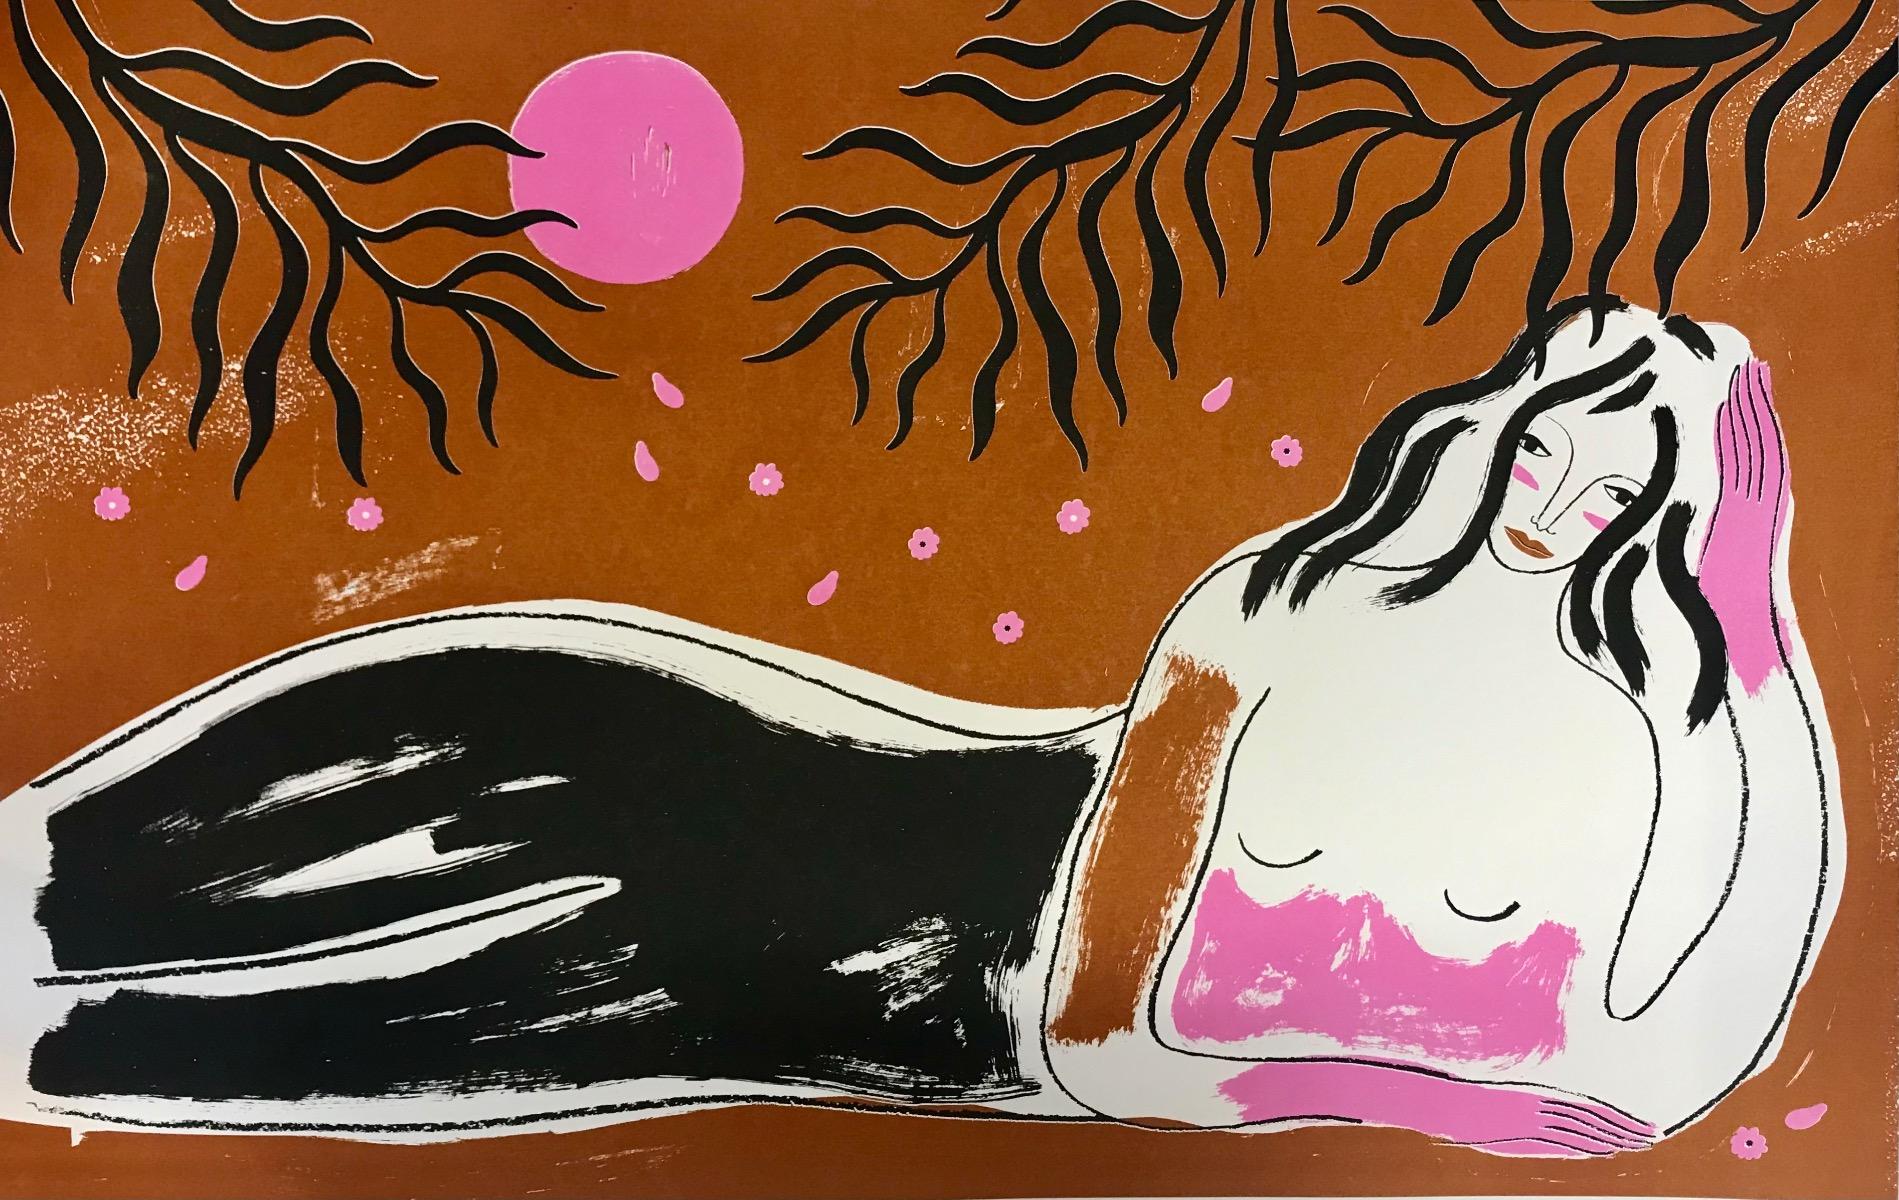 Agnese Negriba Figurative Print - 'Under the Trees' Limited Edition Silkscreen print by Agnese Taurina, affordable